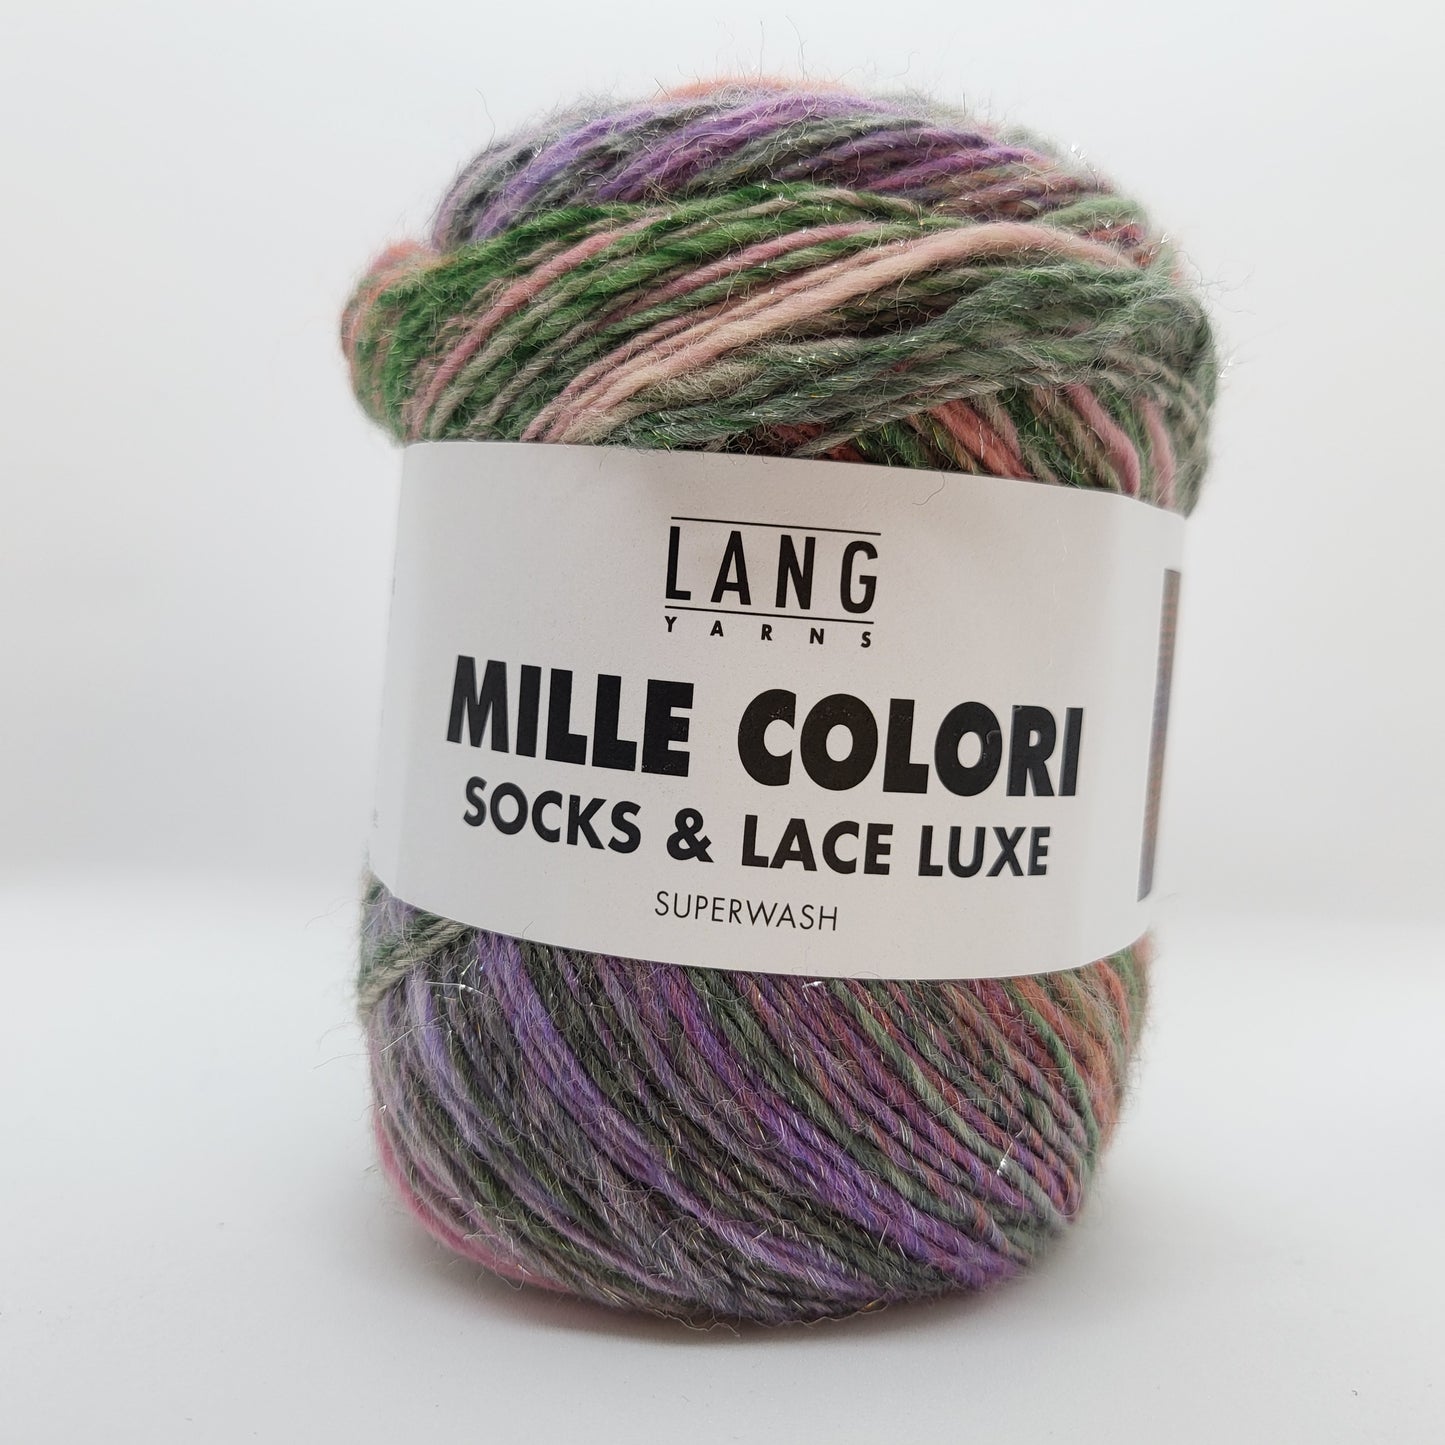 Mille Colori Socks and Lace